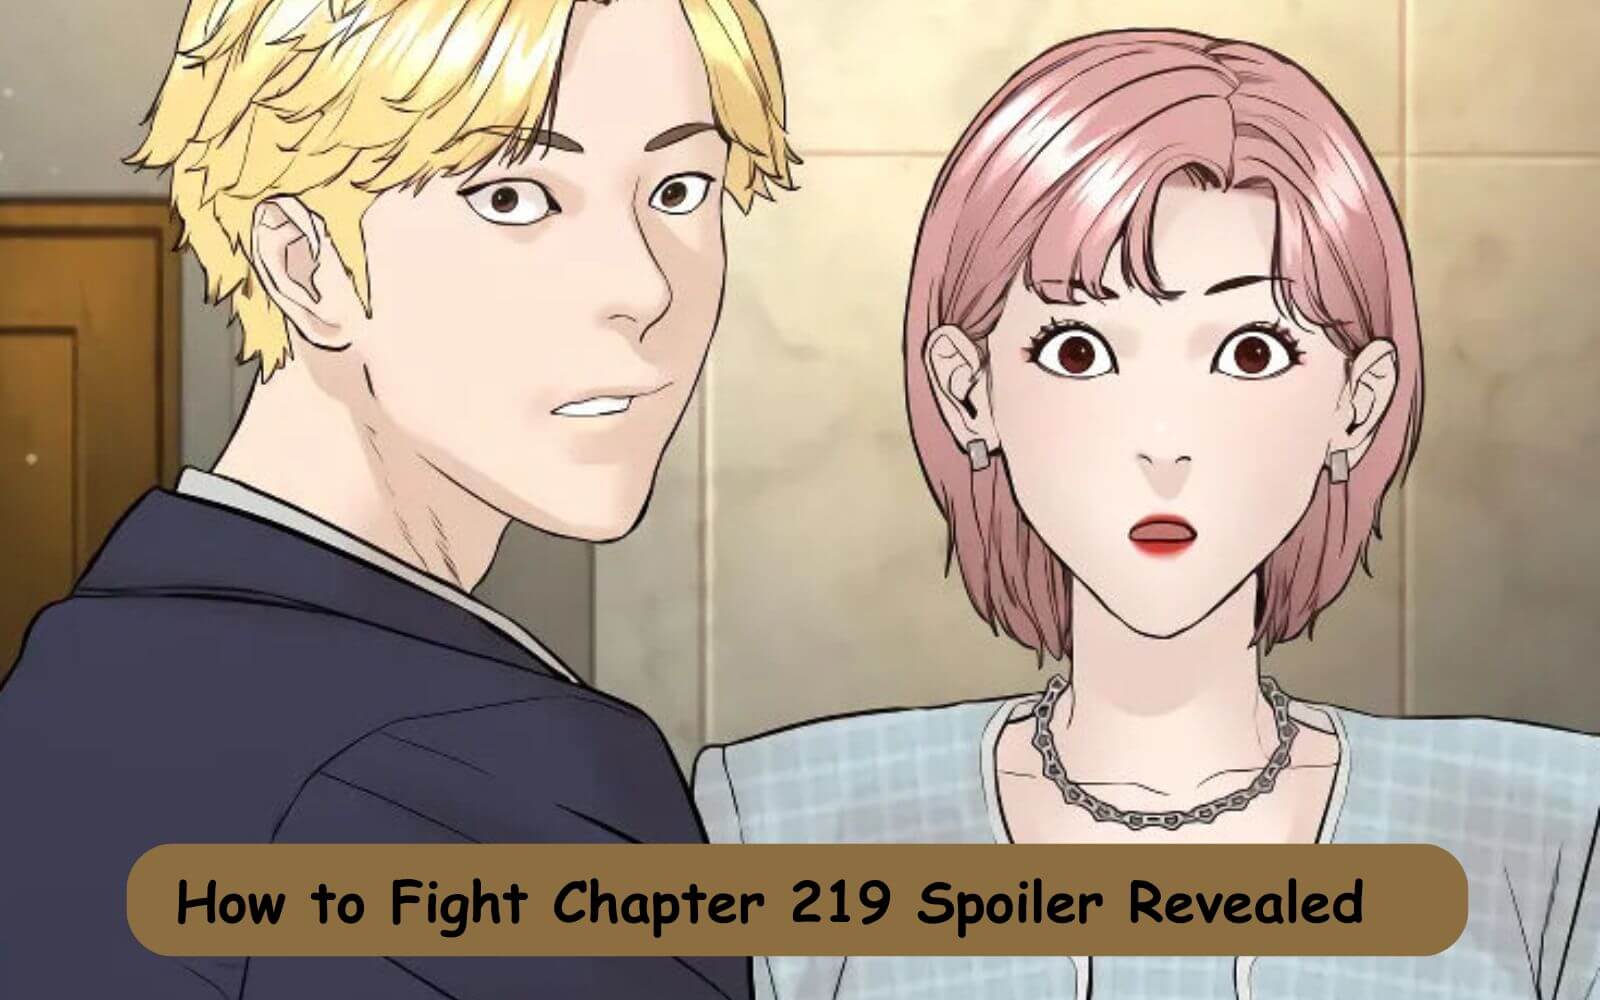 How to Fight Chapter 219 Spoiler Revealed